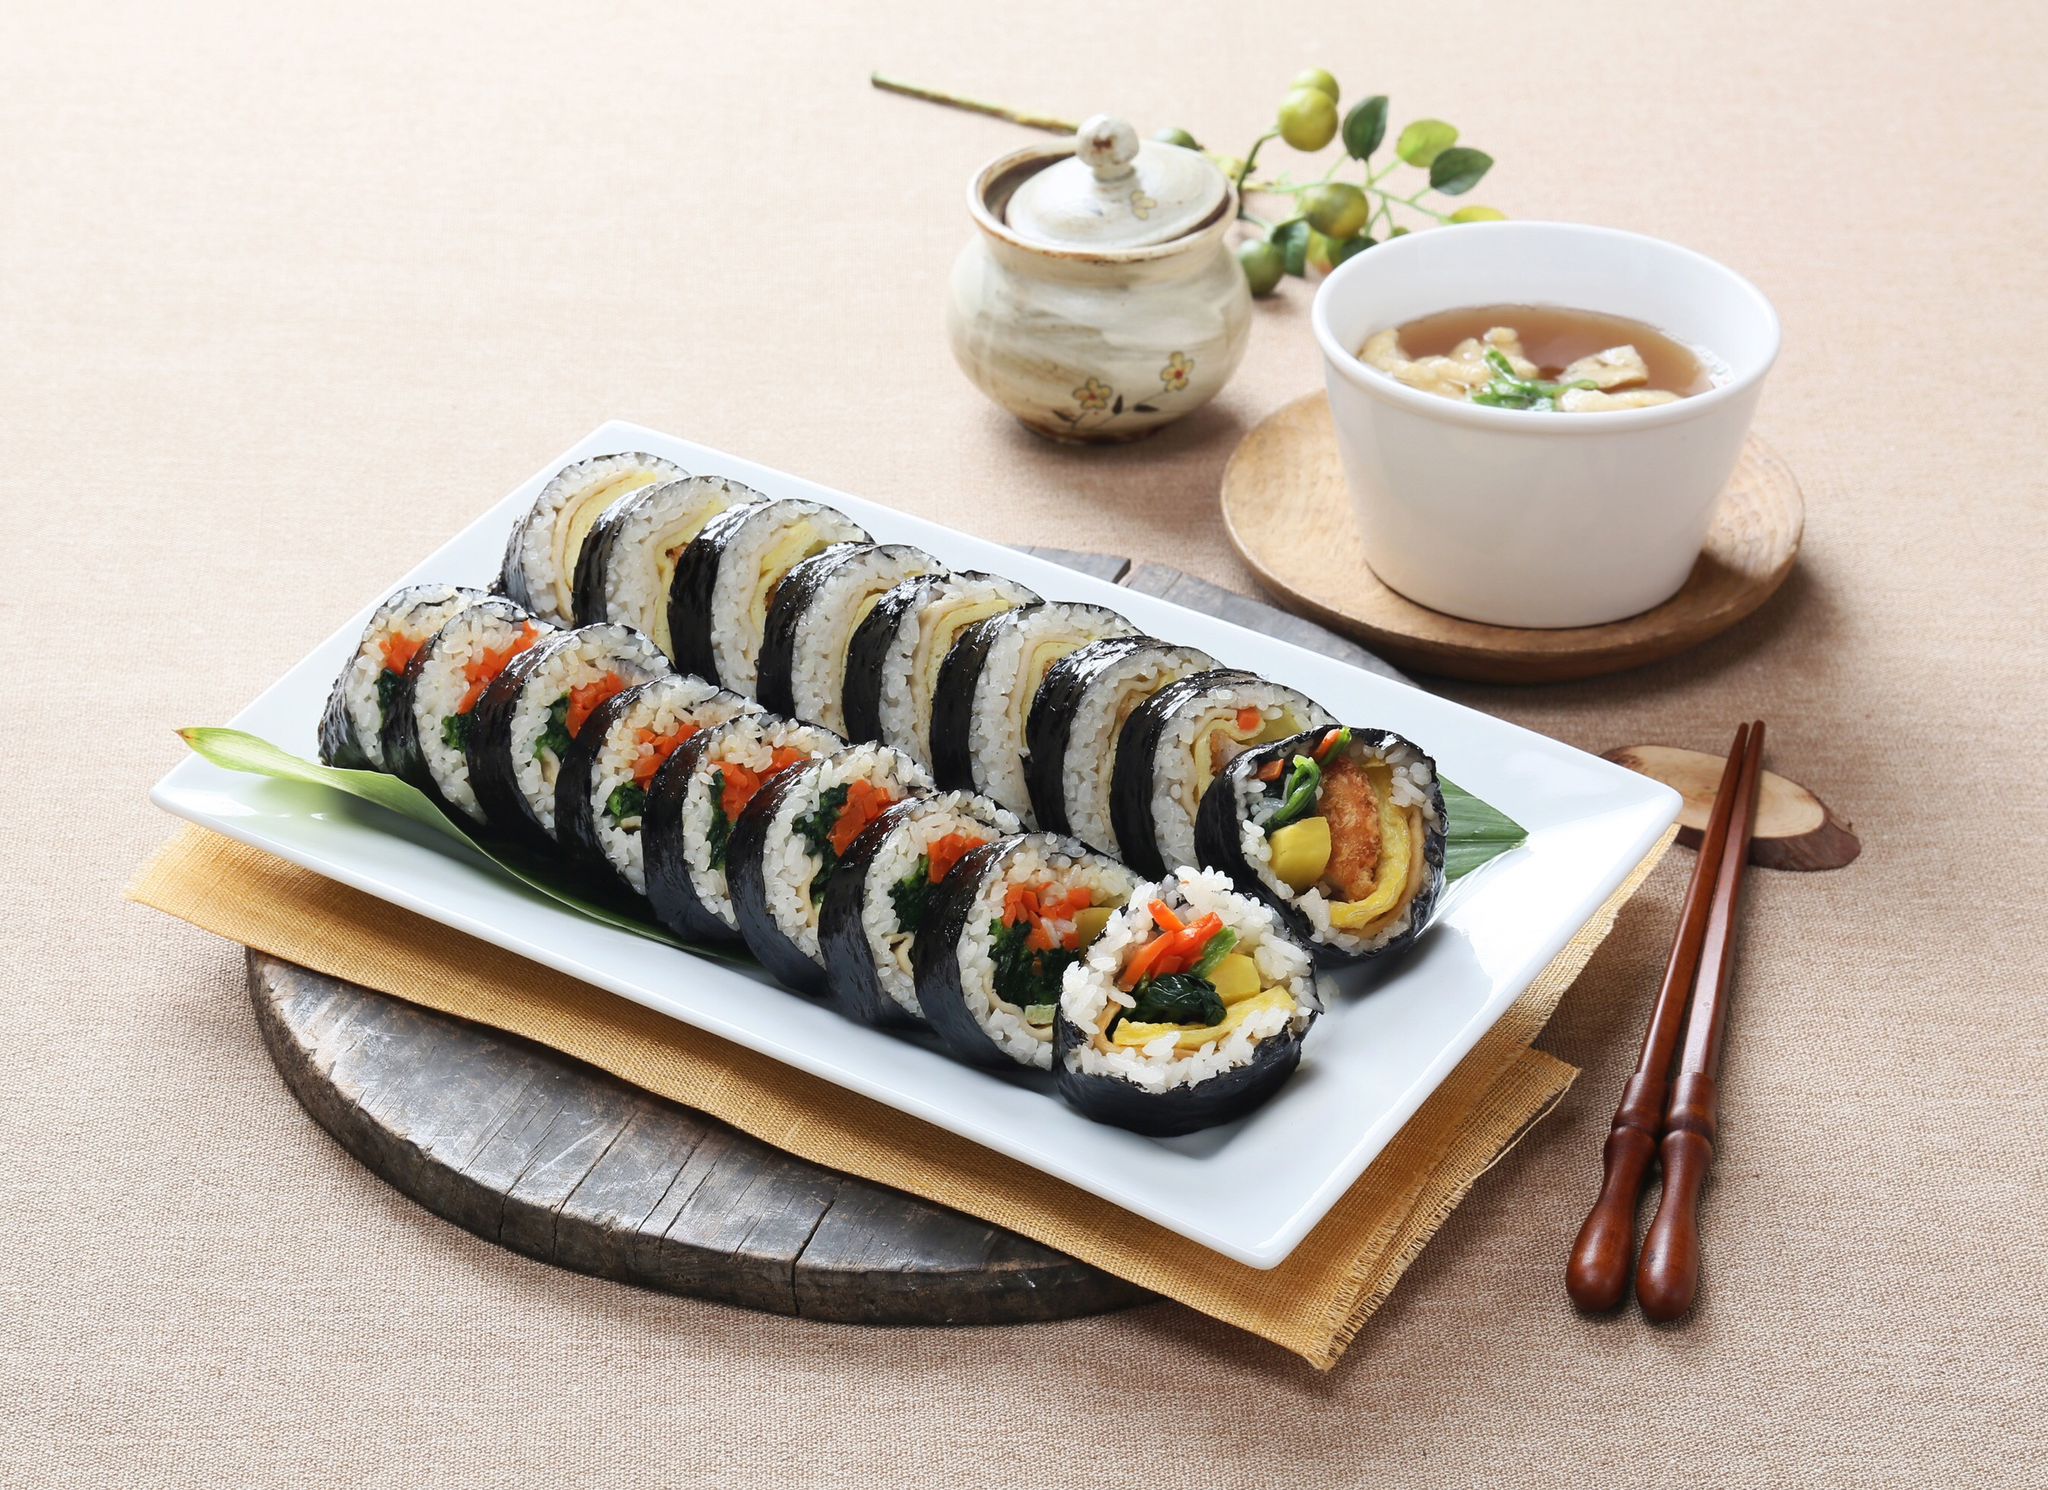 KC Seaweed Special for Gimbap 20g